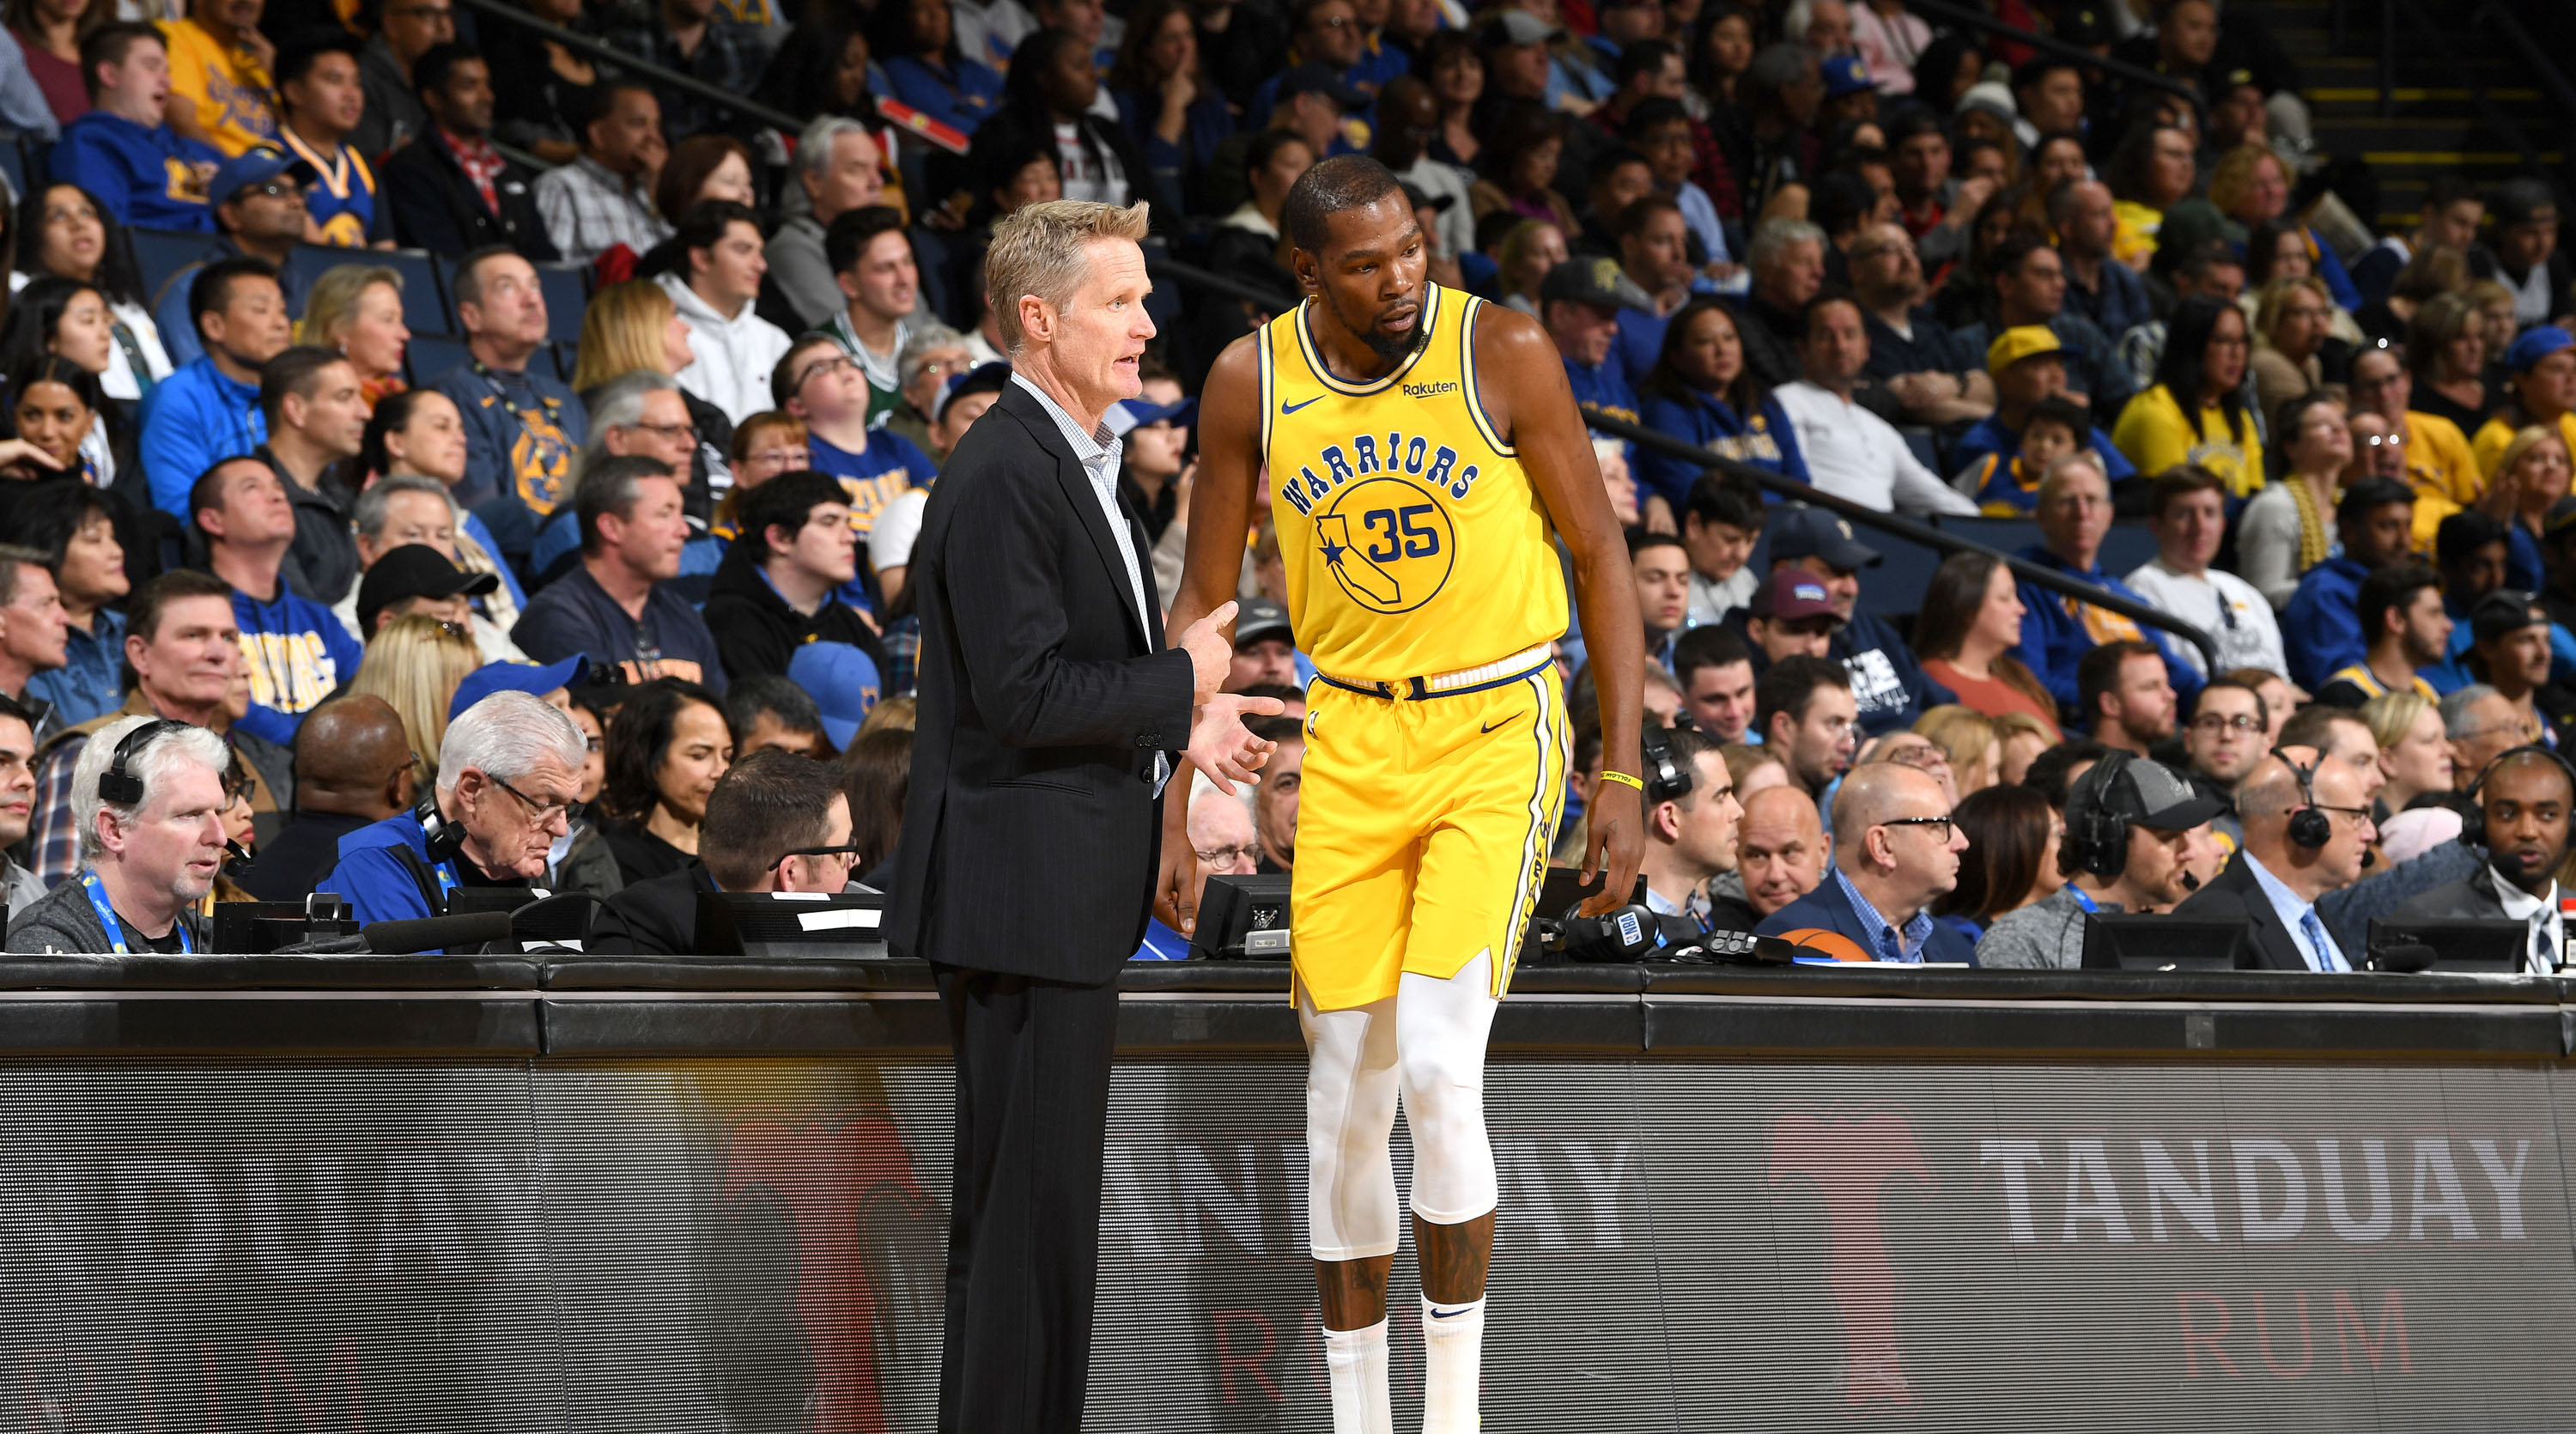 NBA news: Kevin Durant's Injury Has Changed The Way NBA Teams Deal With Injured Players